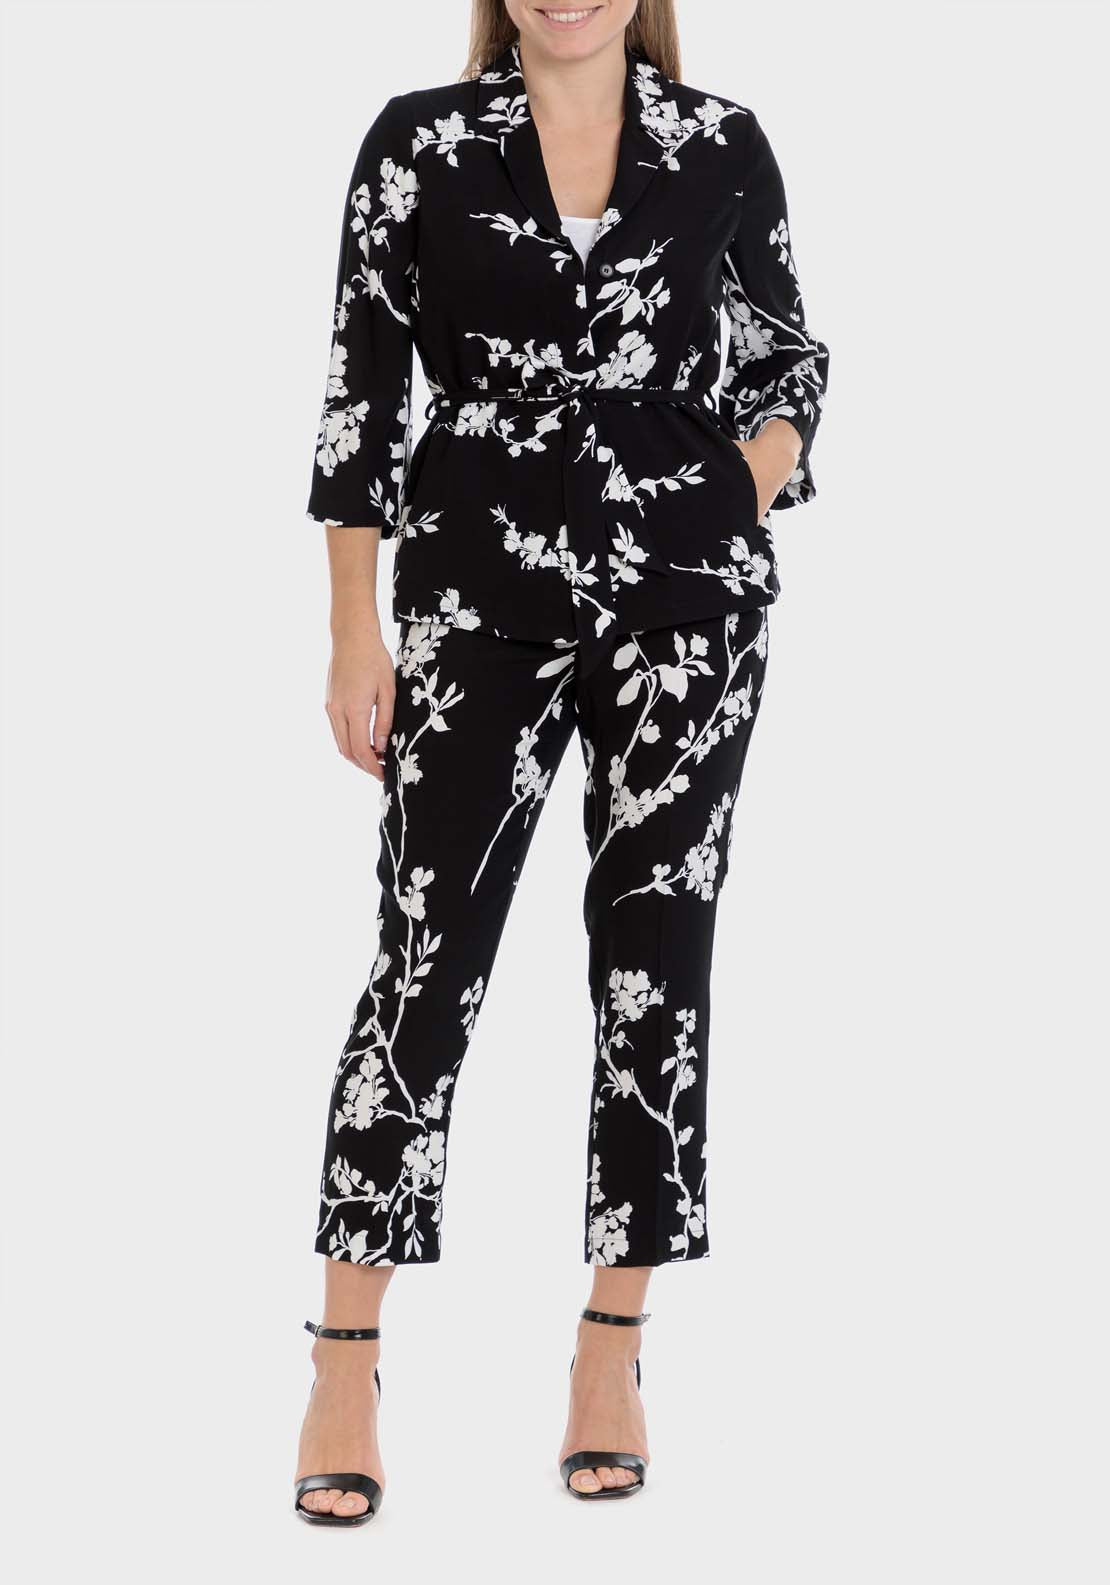 Punt Roma Floral Print Trousers - Black 4 Shaws Department Stores